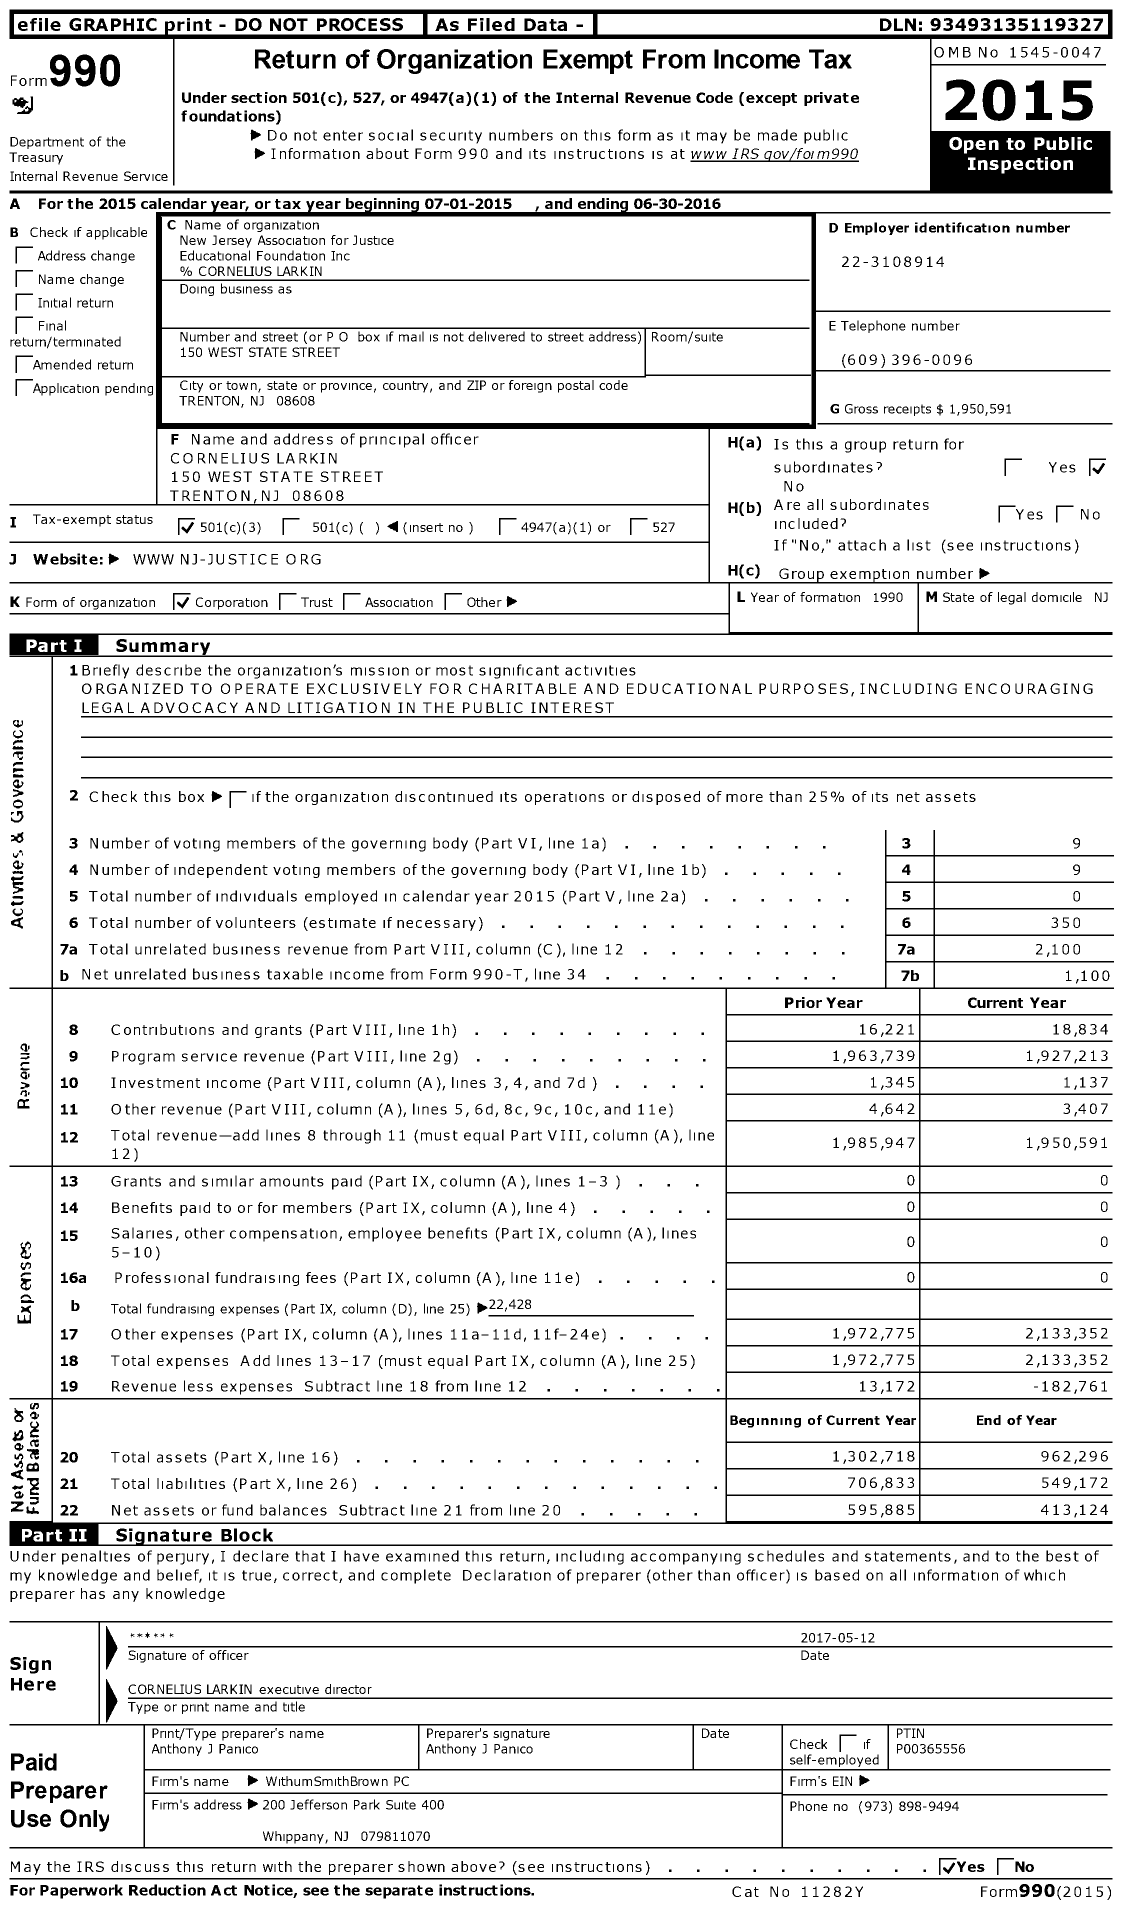 Image of first page of 2015 Form 990 for New Jersey Association for Justice Educational Foundation